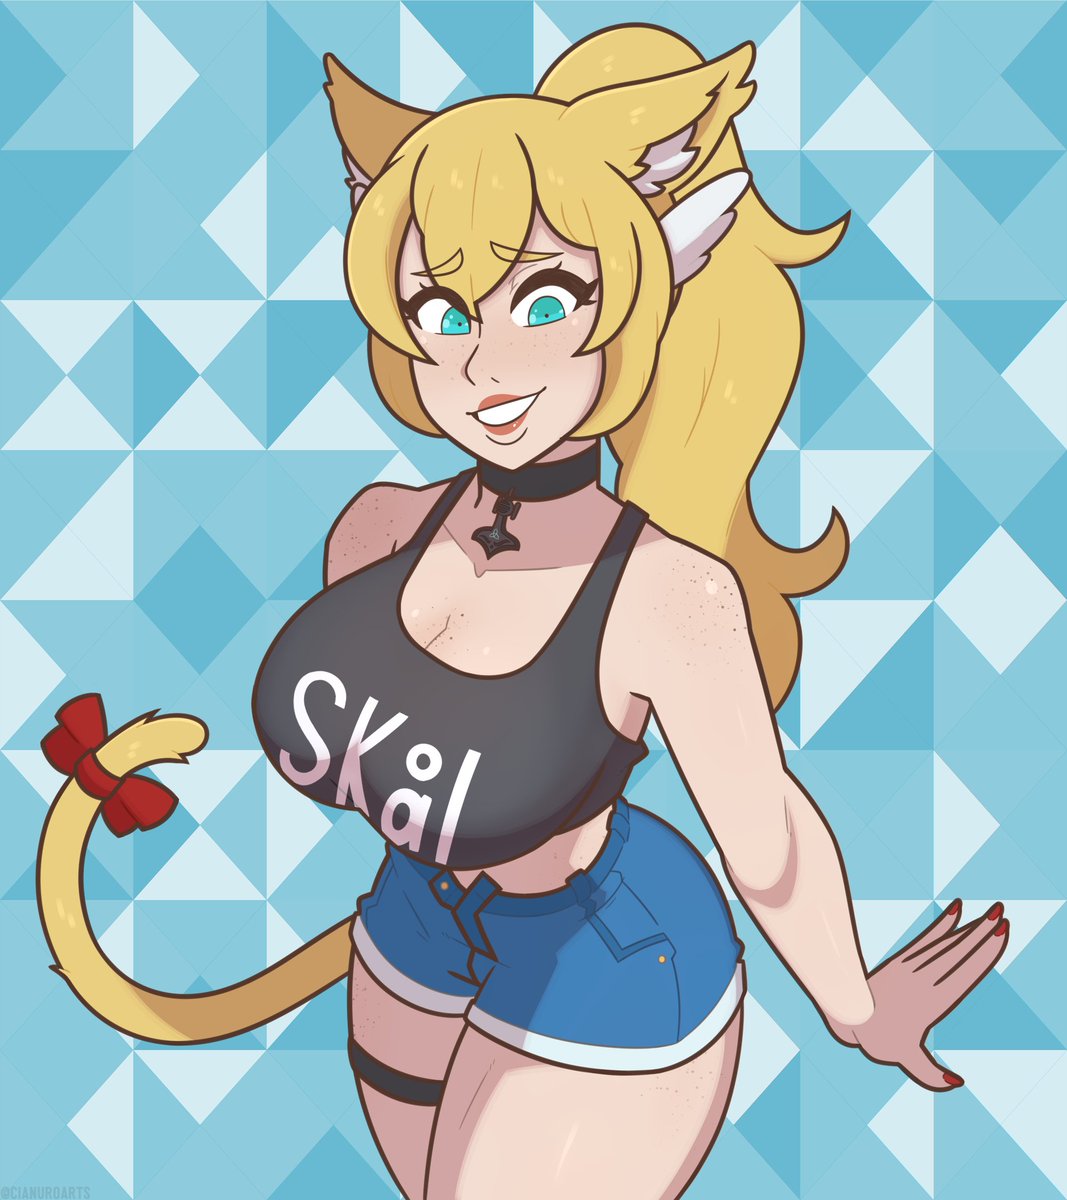 RT @CianuroArts: Commission for @Thor_ChanVR! 

This norse neko loves their refreshing beverages https://t.co/leSyE30Mft